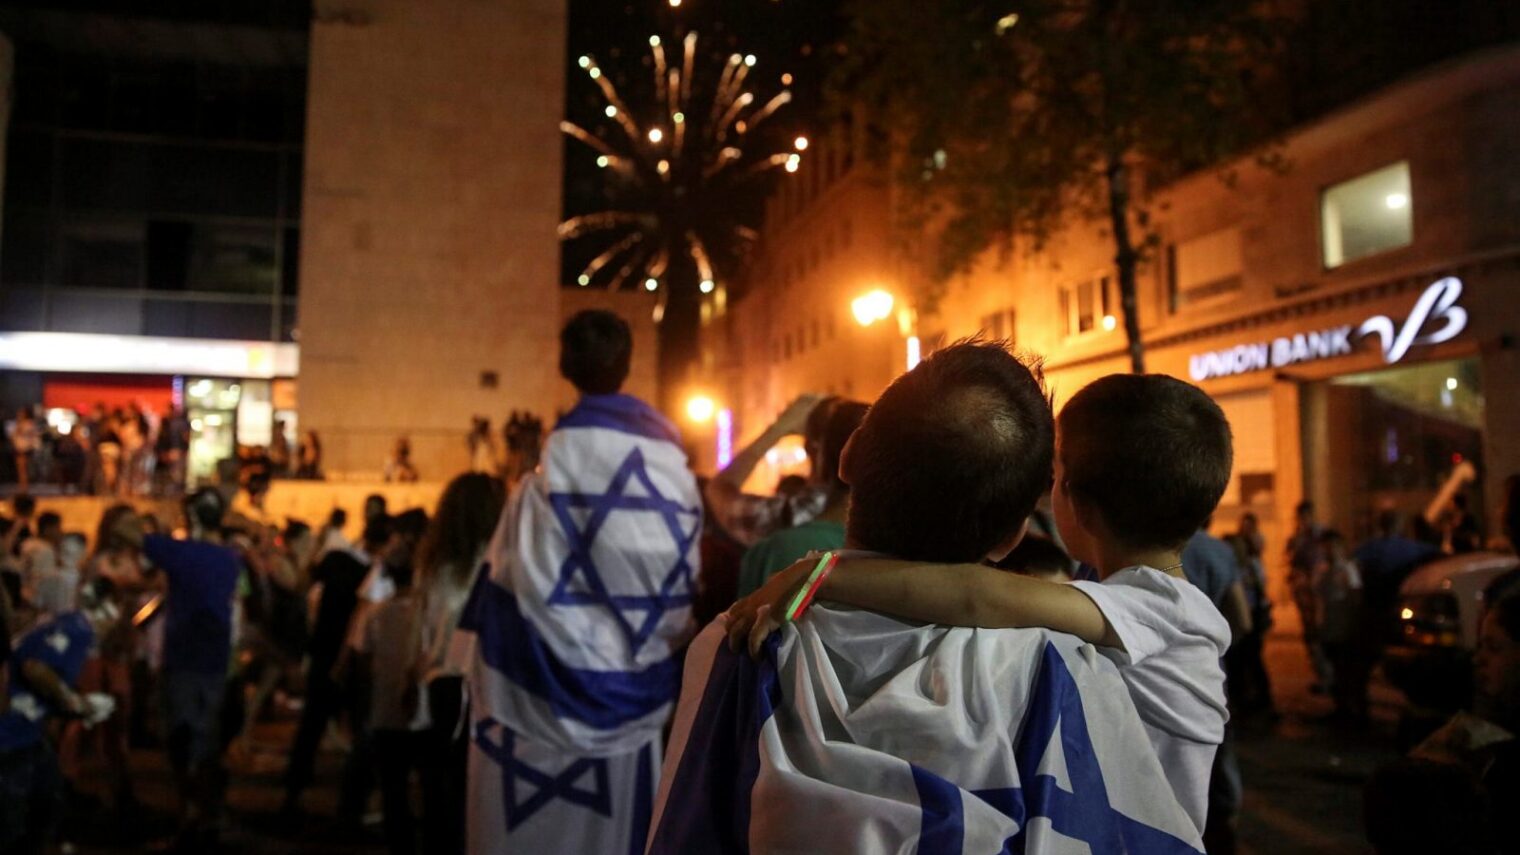 And last, but not least, because it’s our home. Israeli families watch fireworks on Independence Day in Jerusalem. Photo by Hadas Parush/FLASH90